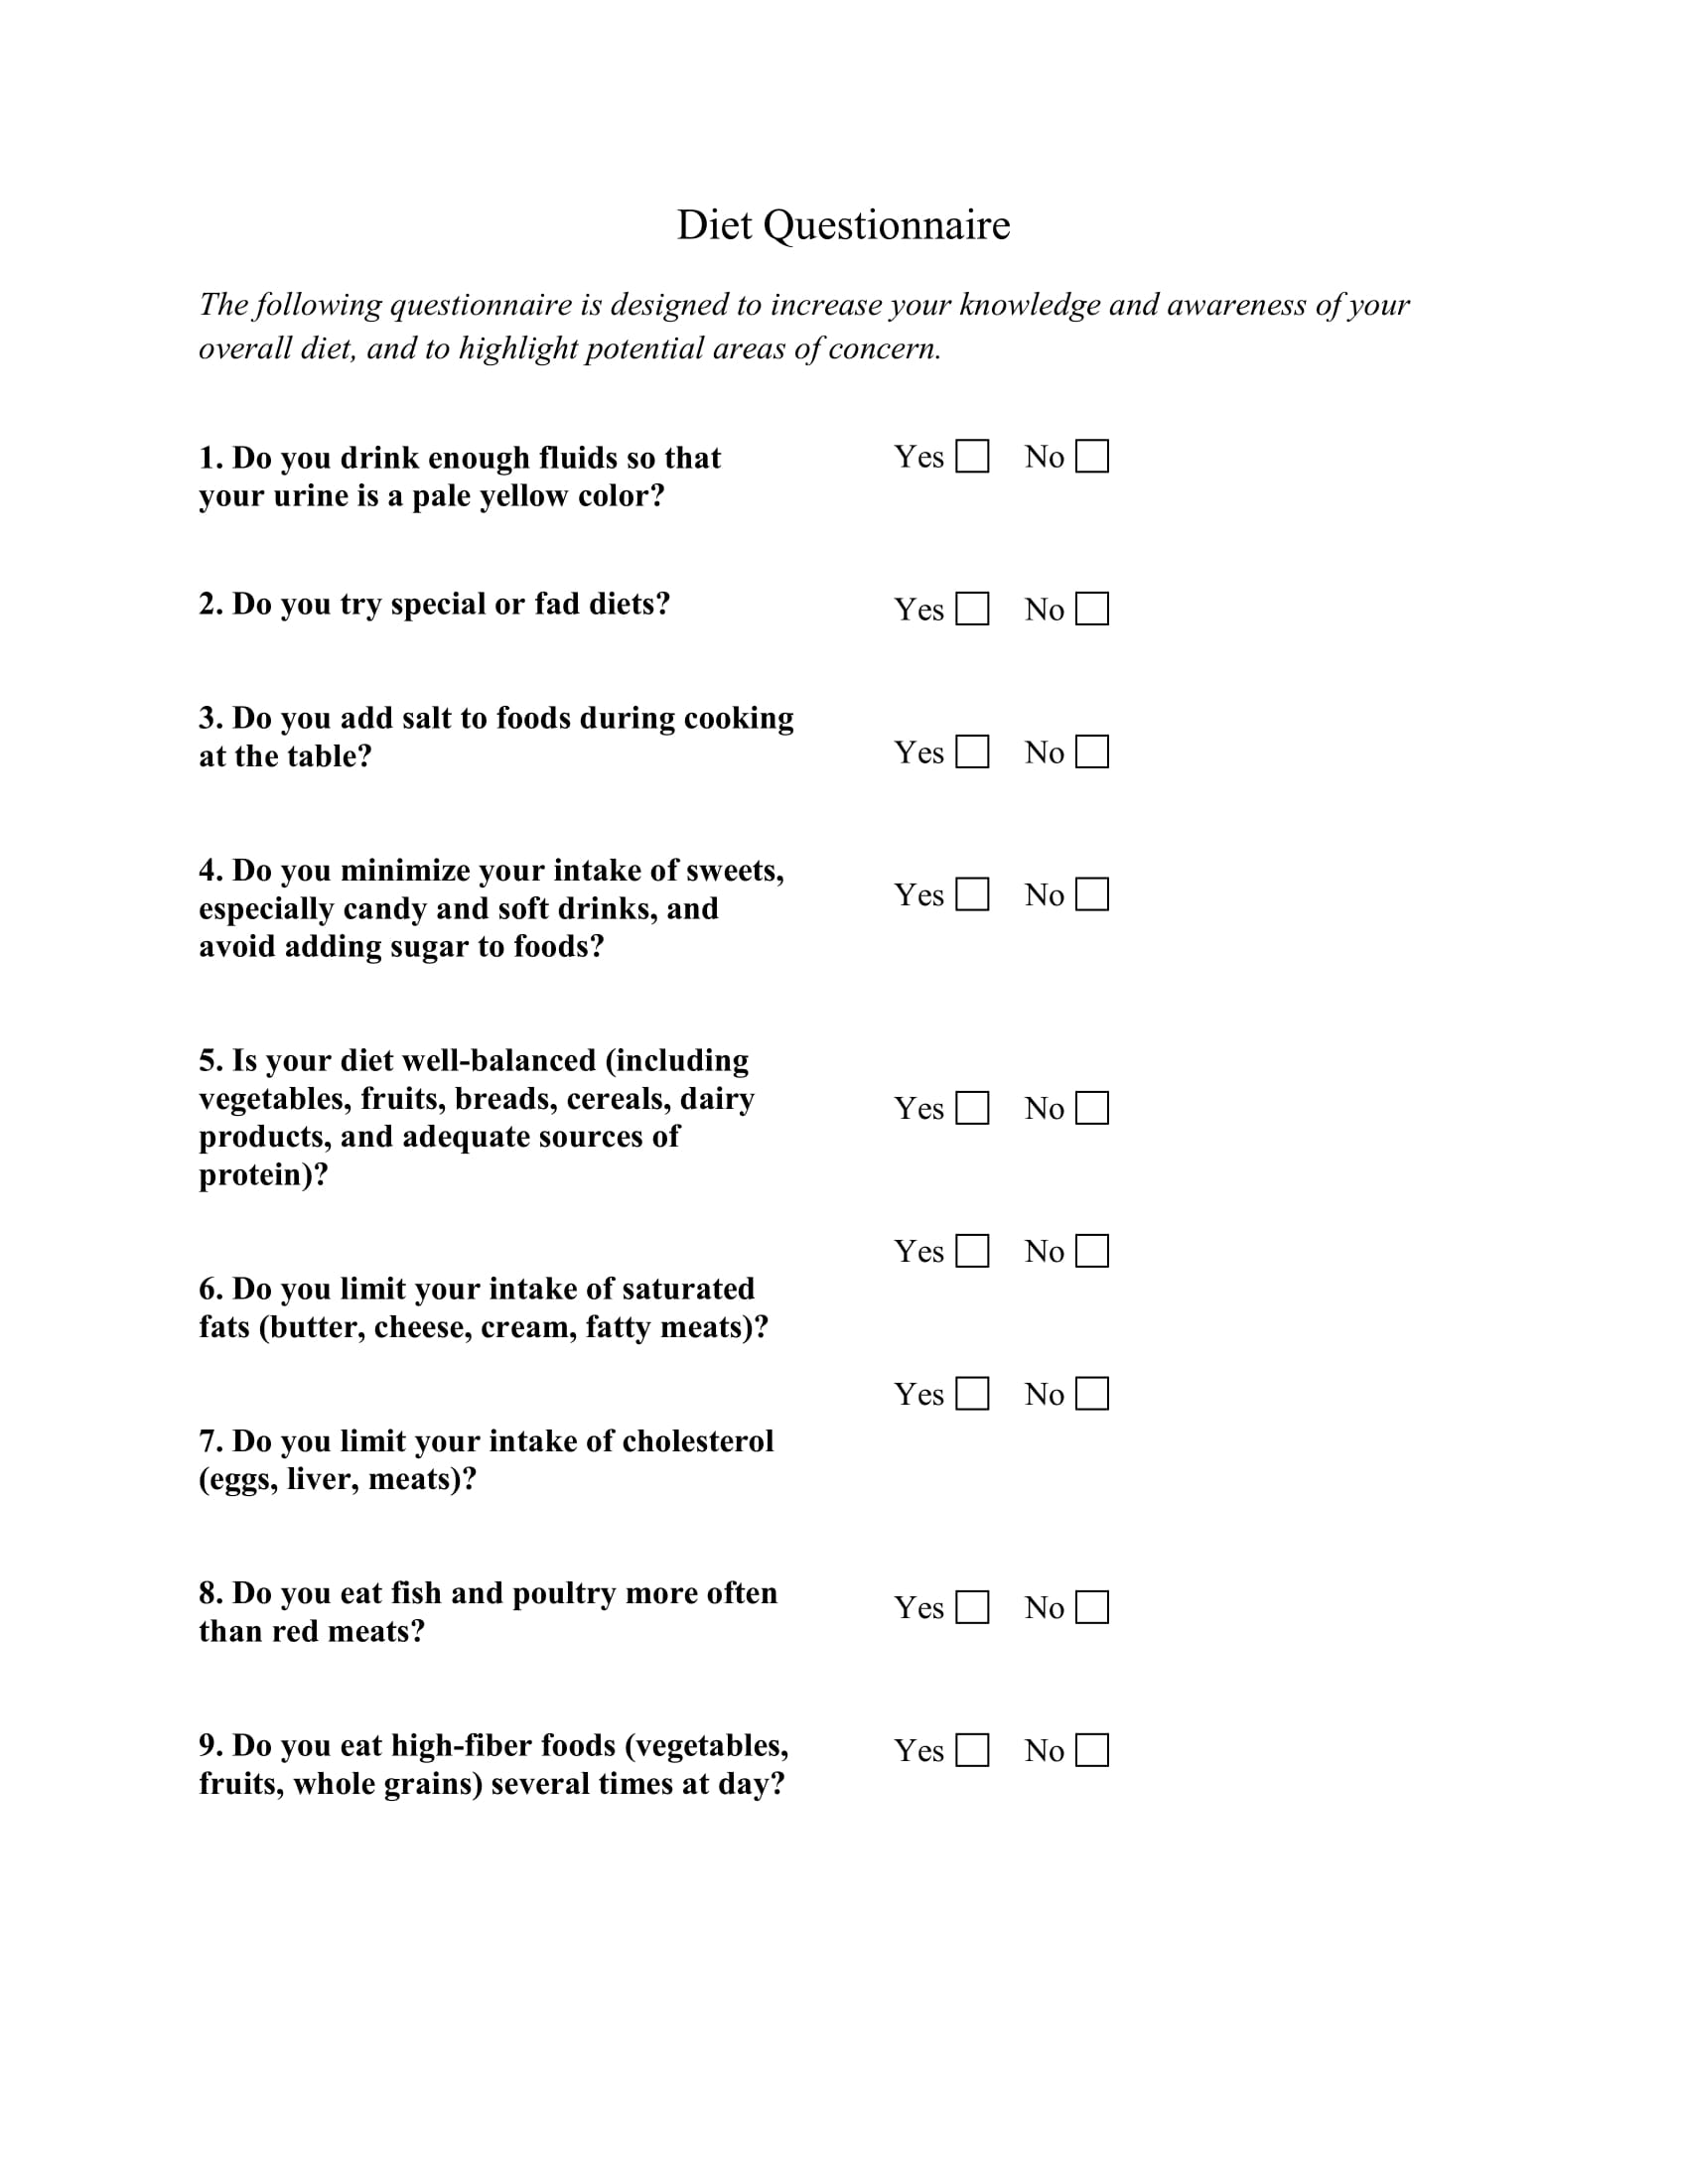 Diet questionnaire you can download and print for your clients.